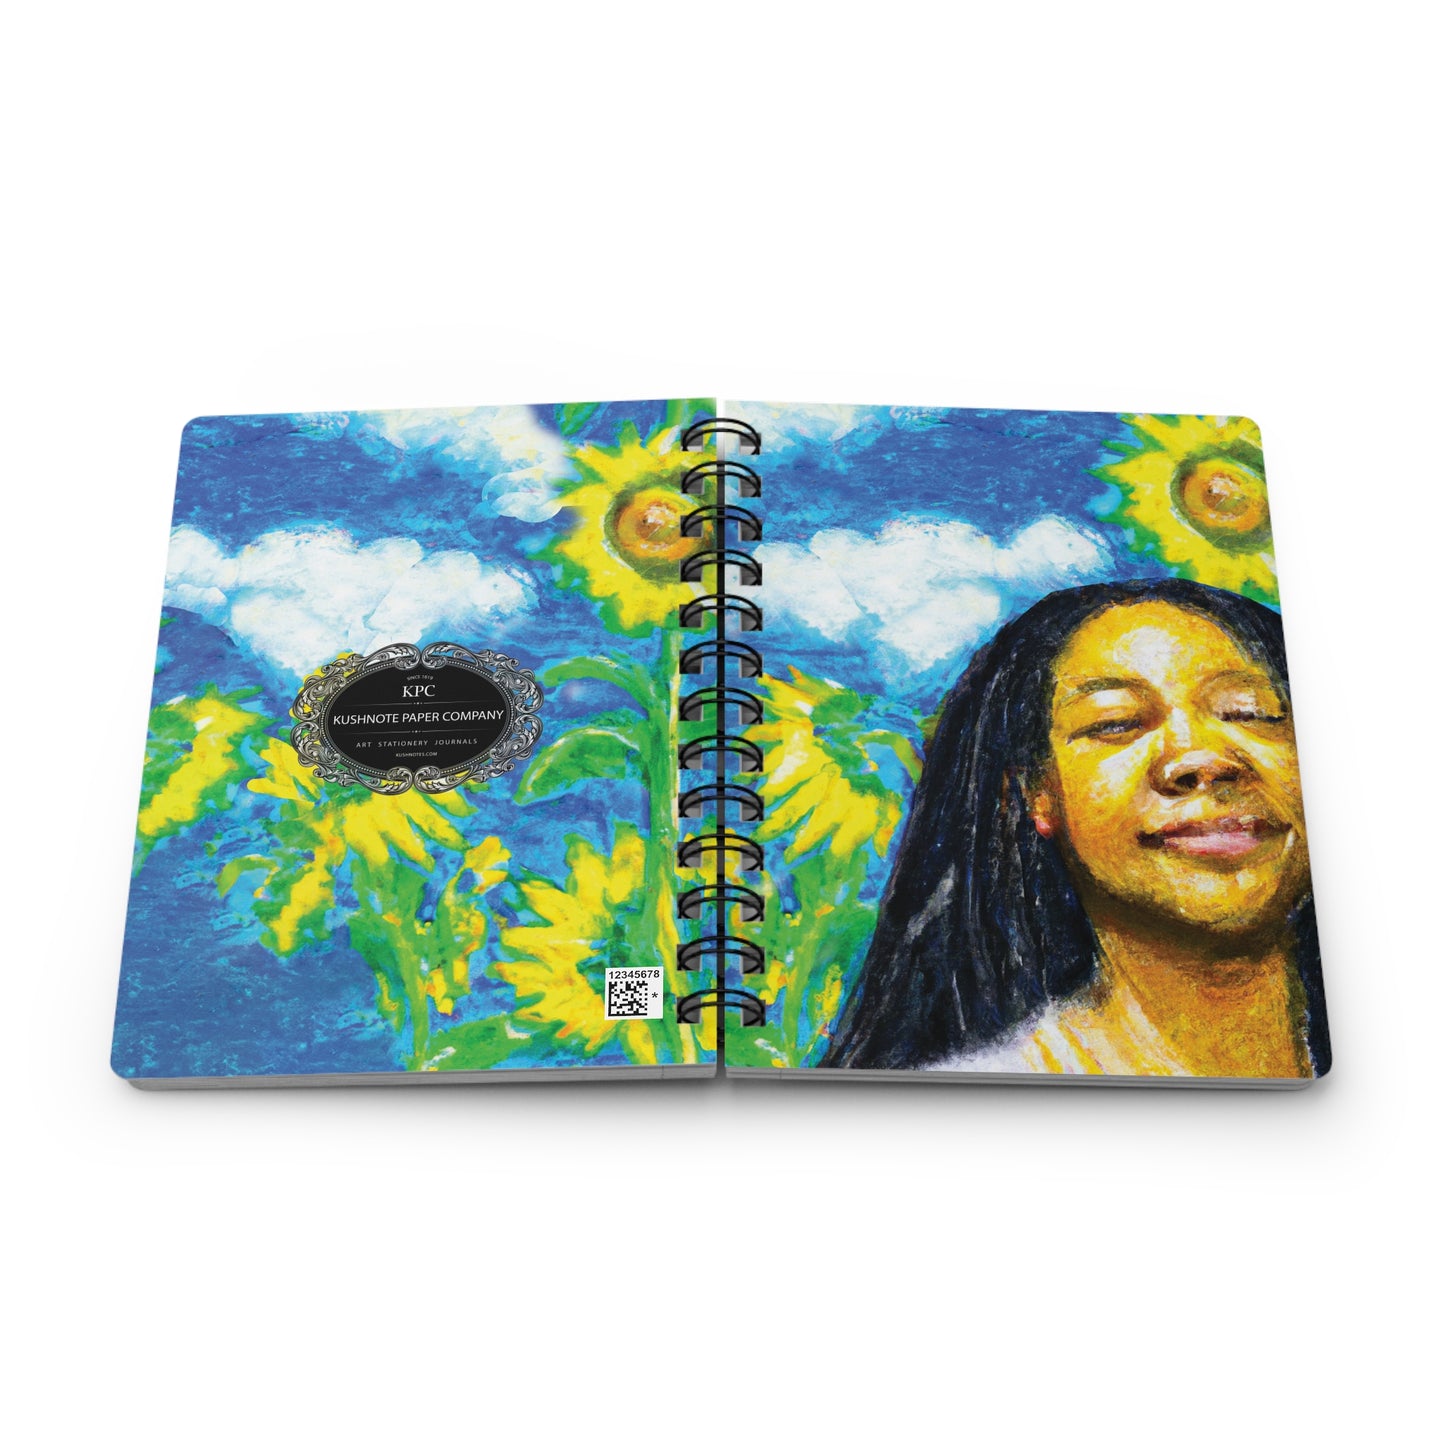 Comfortable in My Skin Spiral Bound Notebooks and Journals with 2023-2024 Year-at-a-Glance Calendar